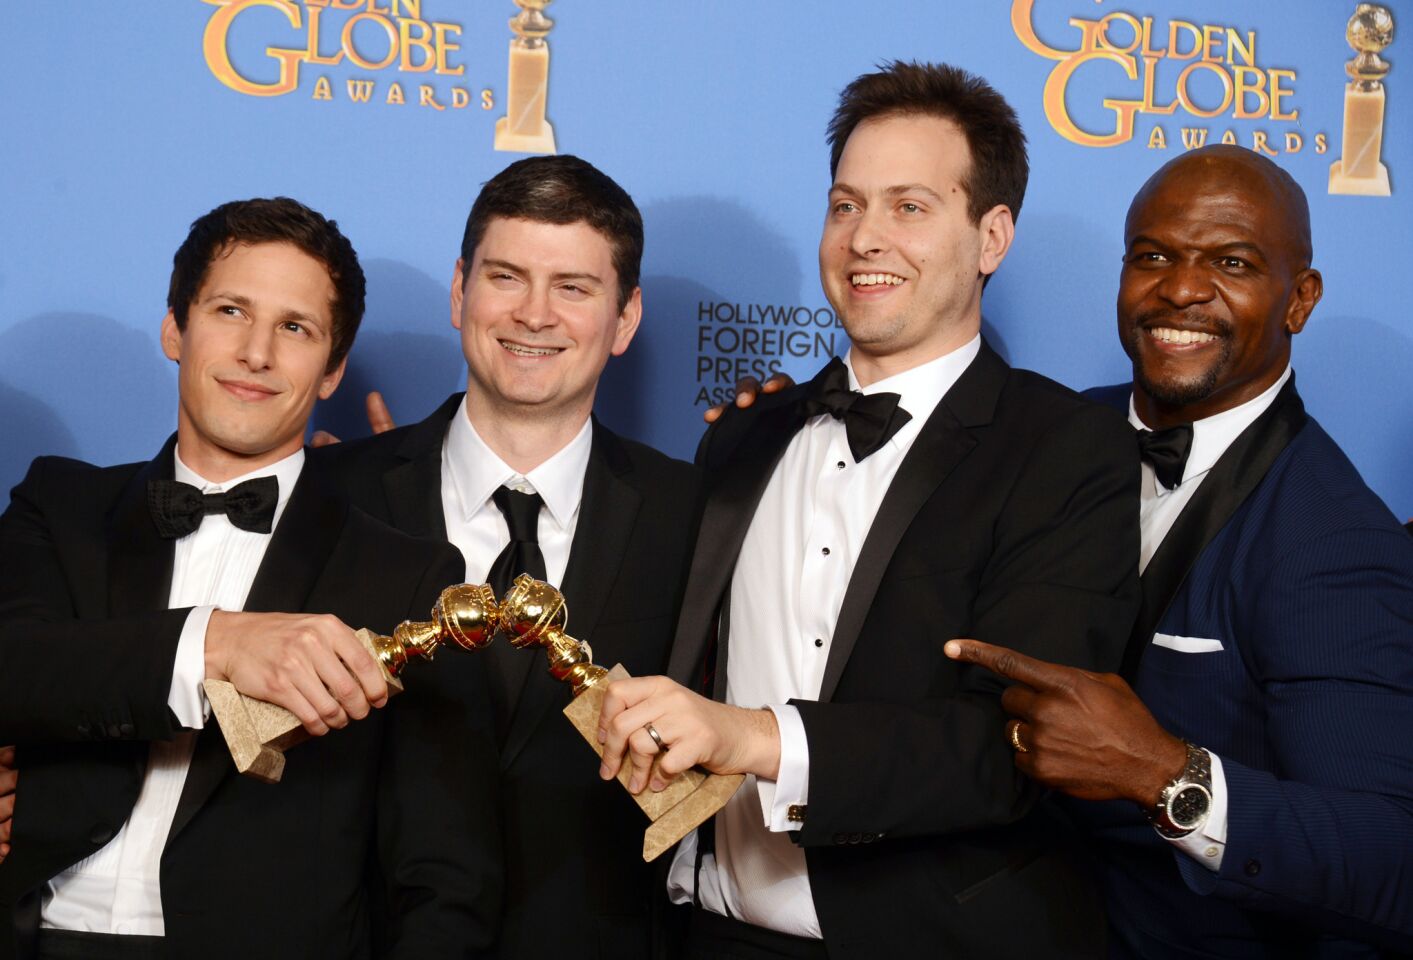 "Brooklyn Nine-Nine" creators after their comedy series win. "We're very stunned, very grateful, very happy," Goore said. "Too many verys. It's hyperbole city." " We built the show around Andy," Schuur explained. "Andre [Braugher] was the last person on the list. We skyped with him to get to know him. About 10 seconds in, he made this joke and cracked this enormous smile that blinded us through our computer screen. We knew immediately that was our guy. Thankfully he said yes." "Everything about the TV business is mysterious and unknowable," Schuur said when asked about the uncertainty of the show's future. "The real answer is, we don't take anything for granted. But those kind of decisions are made in April and May. We just keep on trying to make the best show we can."